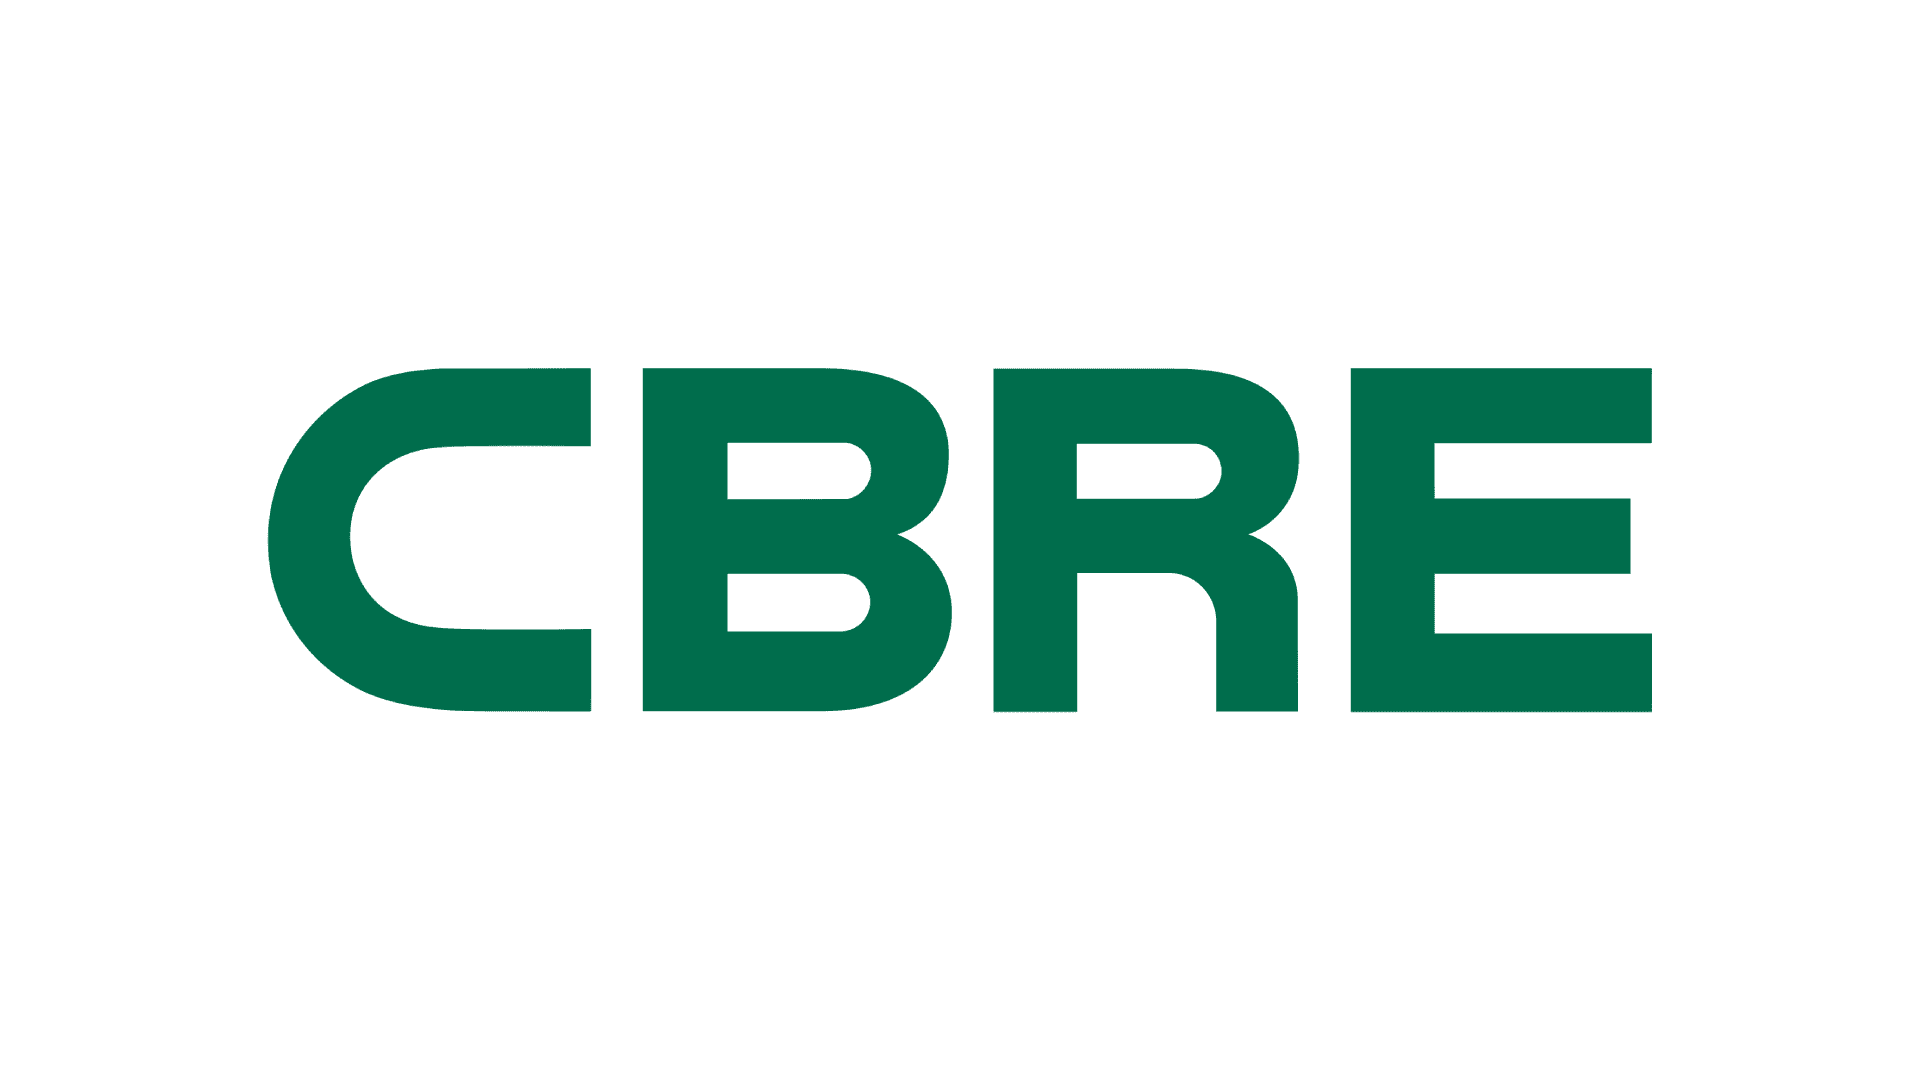 CBRE works with CADS